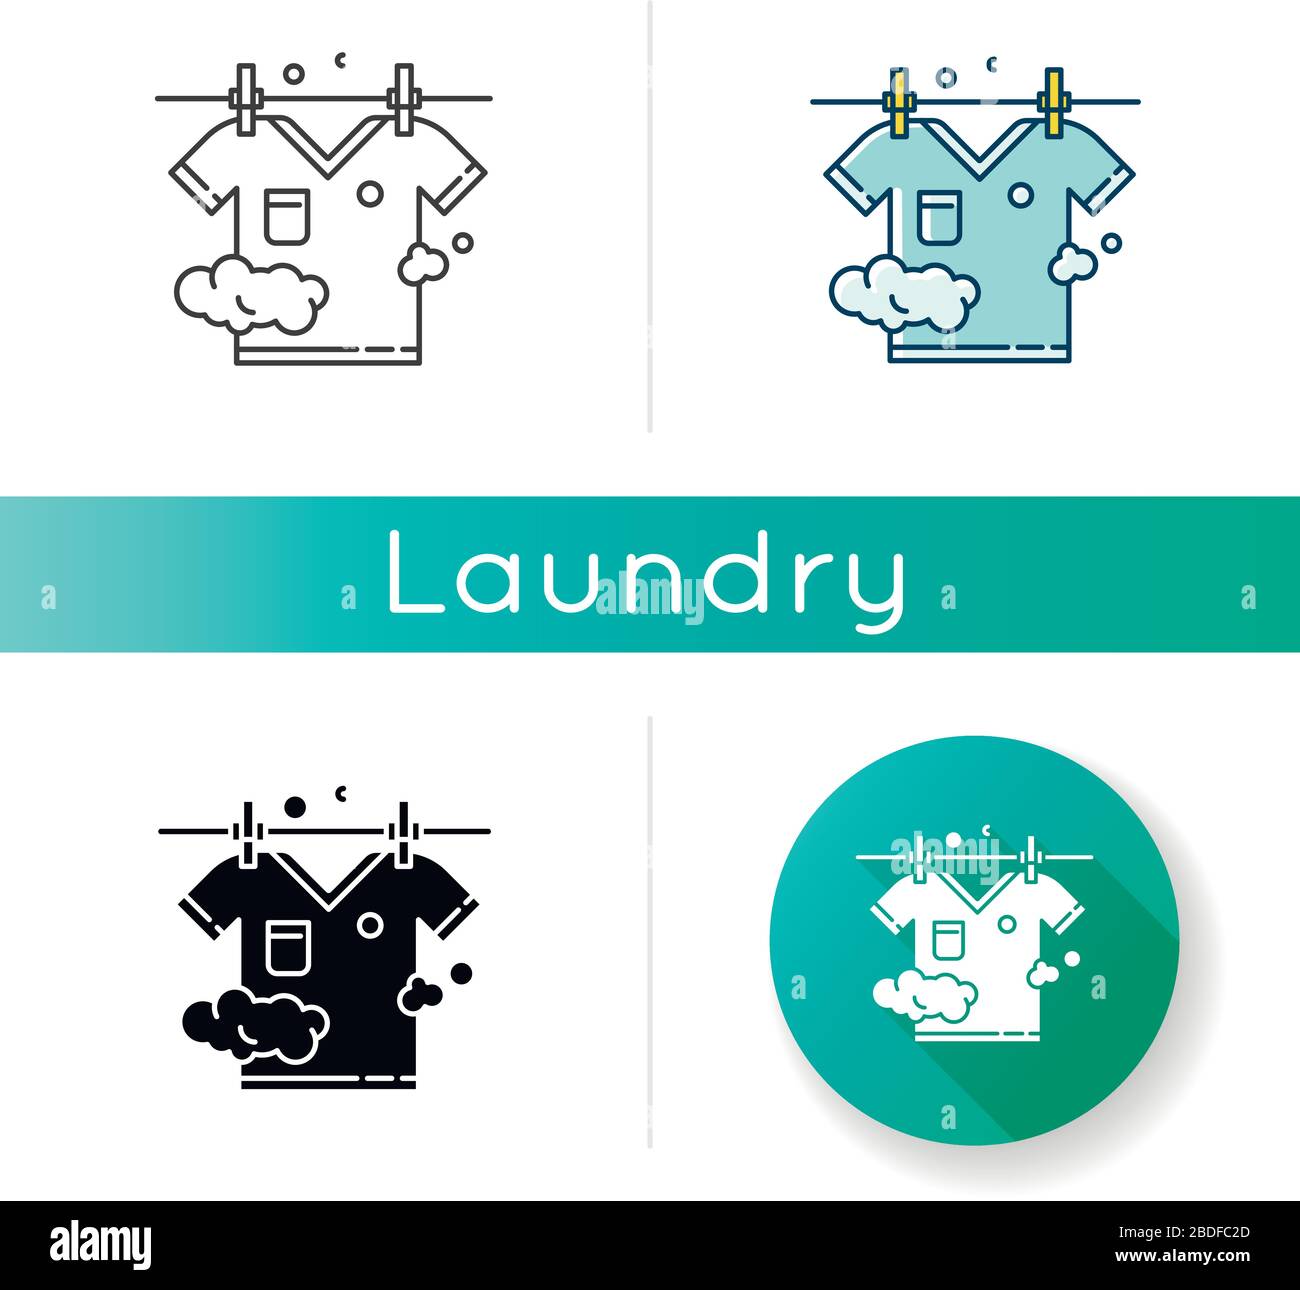 Outdoor drying icon. Laundry, clothesline, outside clothes drying. T-shirt hanging on rope, clean summer clothing, washed garment. Linear black and Stock Vector